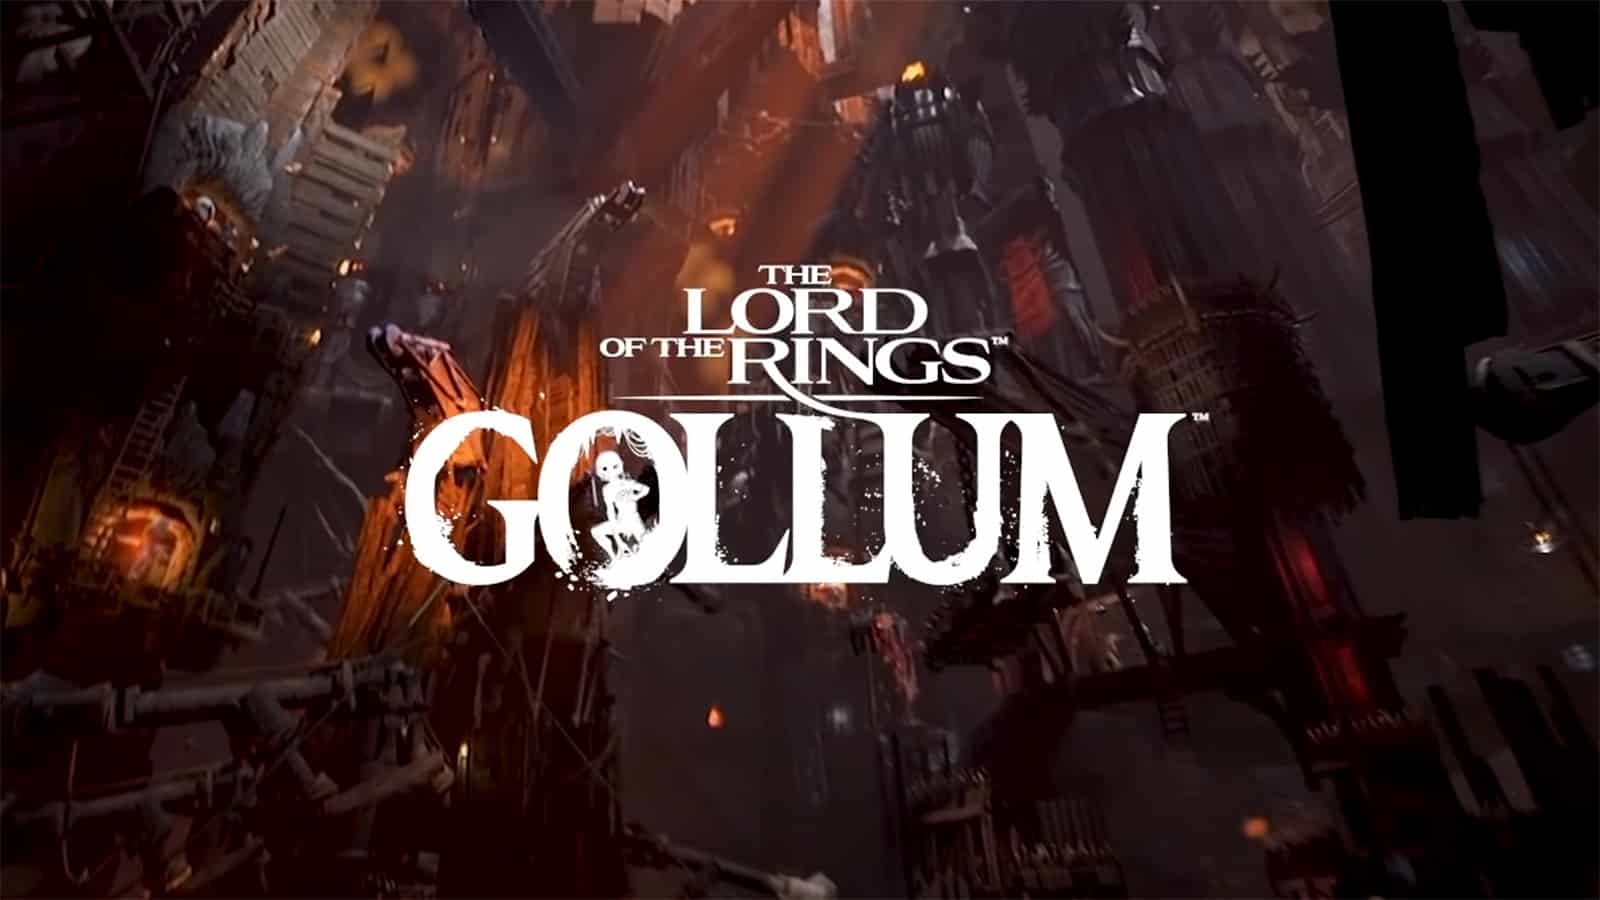 The Lord of the Rings: Gollum gameplay reveal trailer